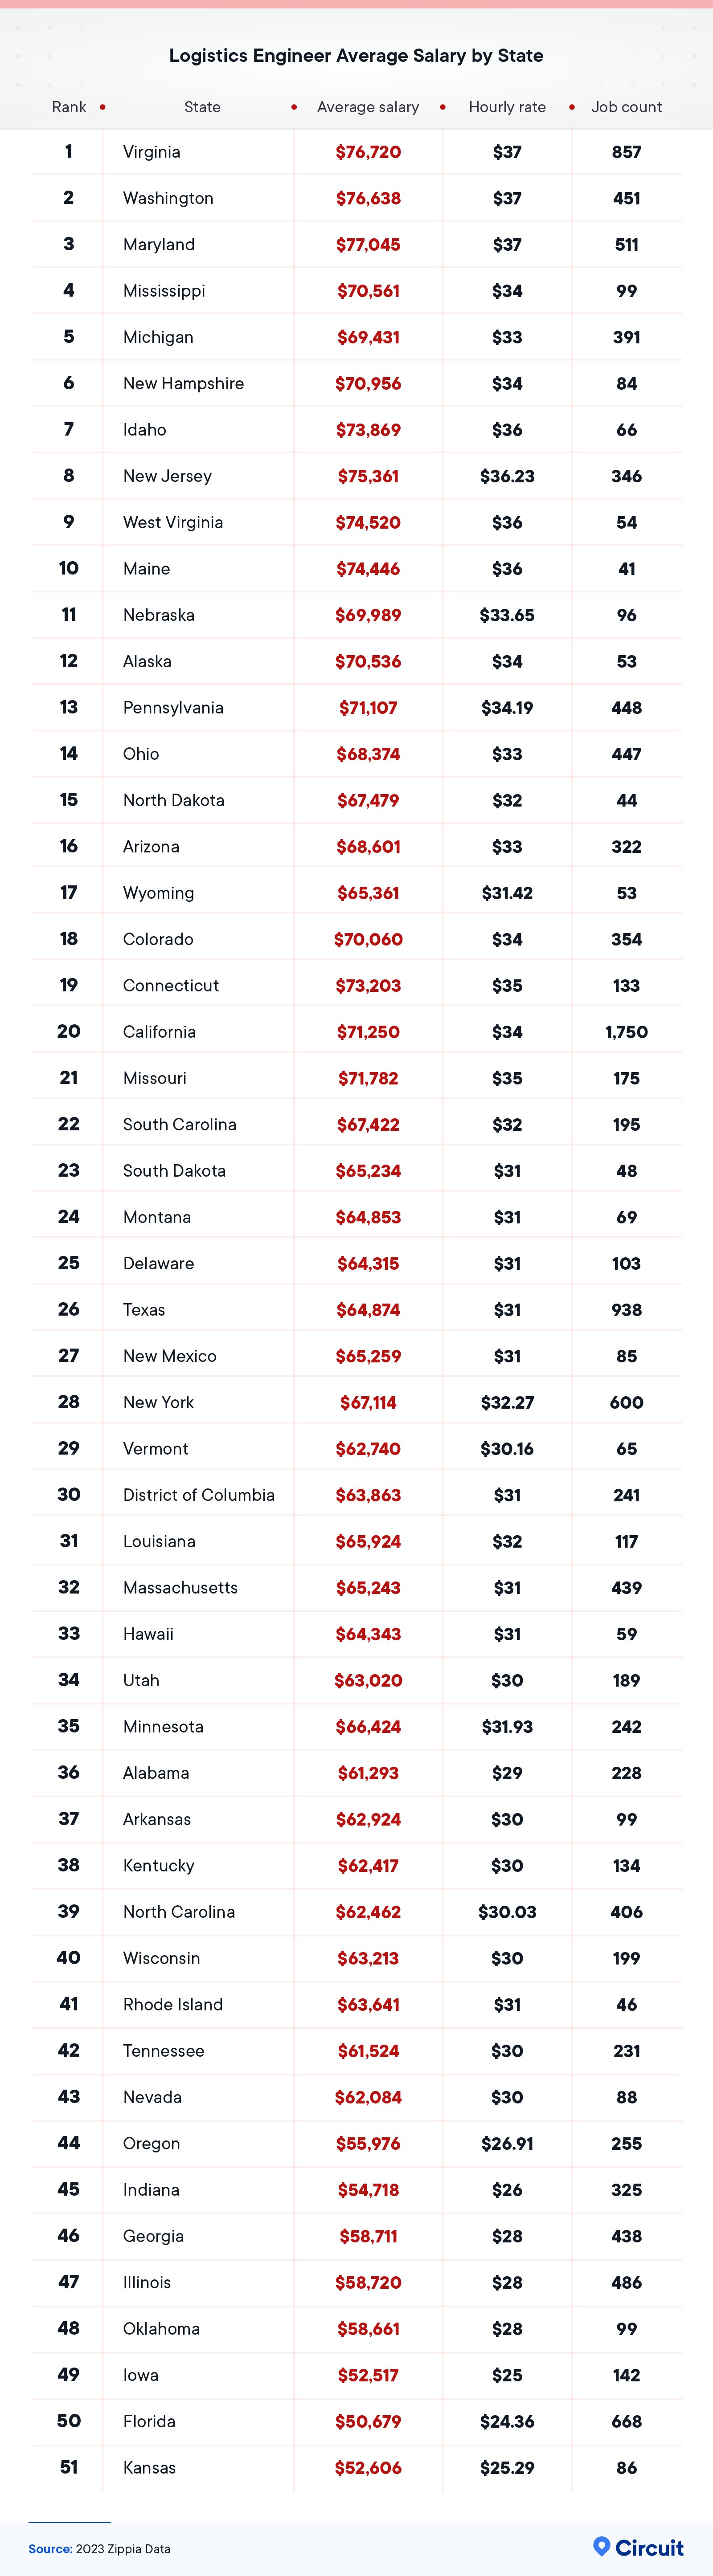 Logistics engineer average salary by state